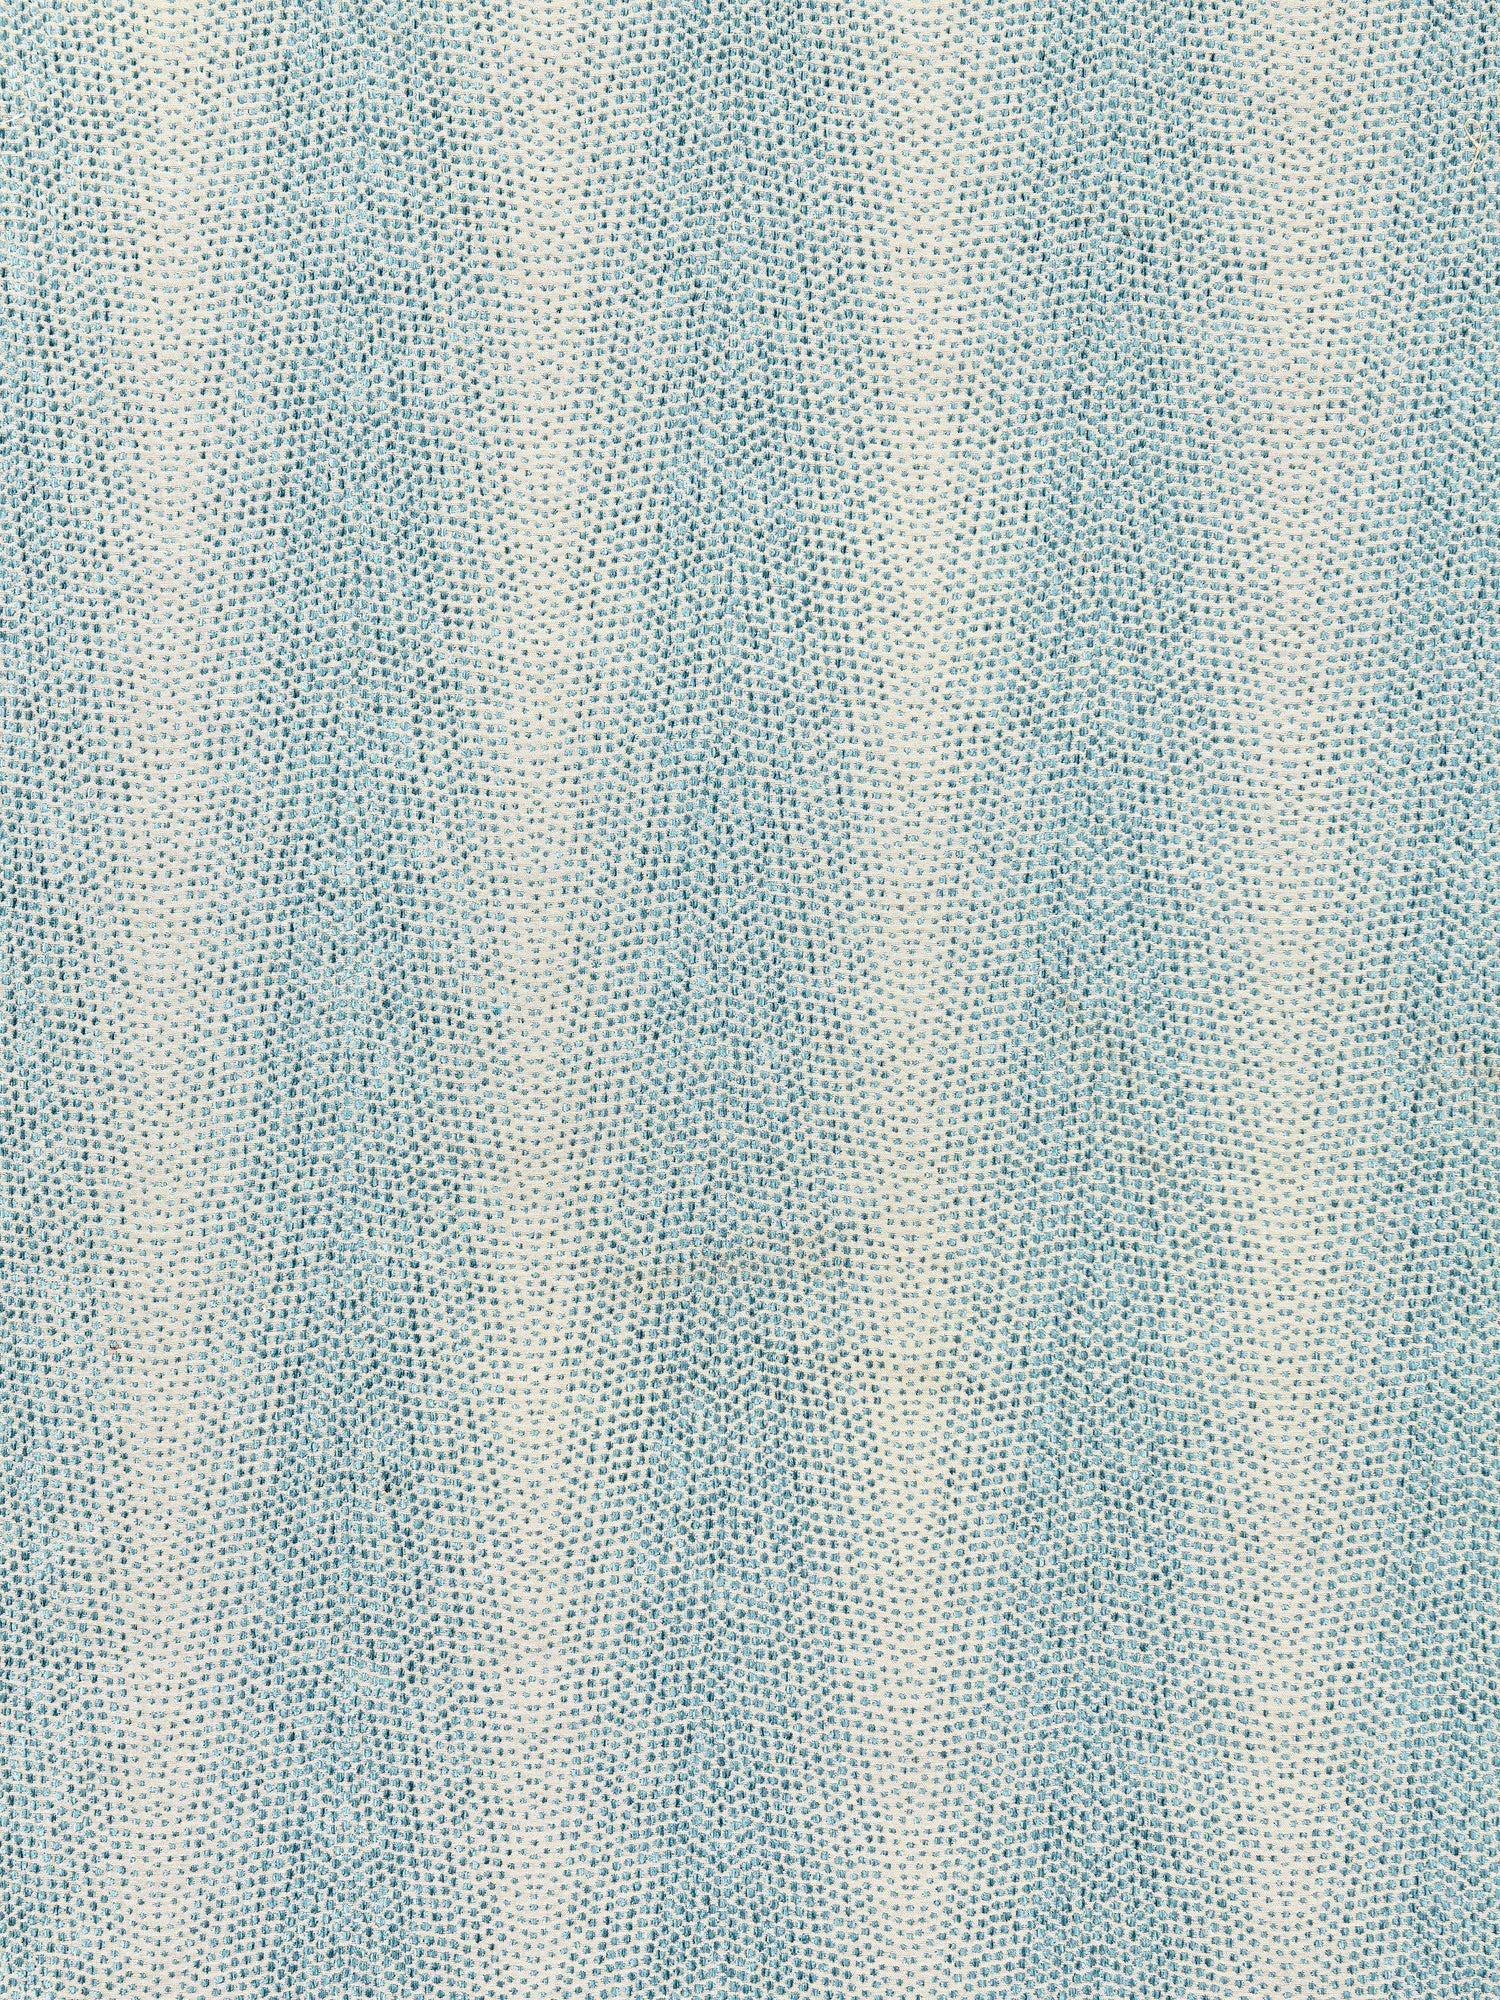 Despres Weave fabric in mineral color - pattern number SC 000227144 - by Scalamandre in the Scalamandre Fabrics Book 1 collection